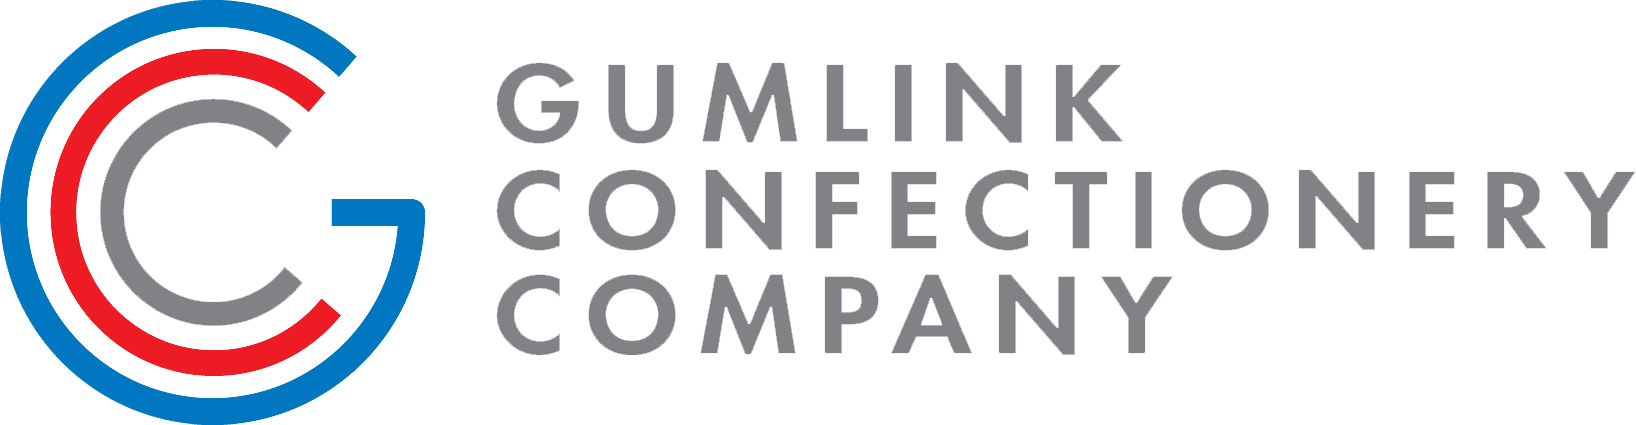 gumlink confectionery company